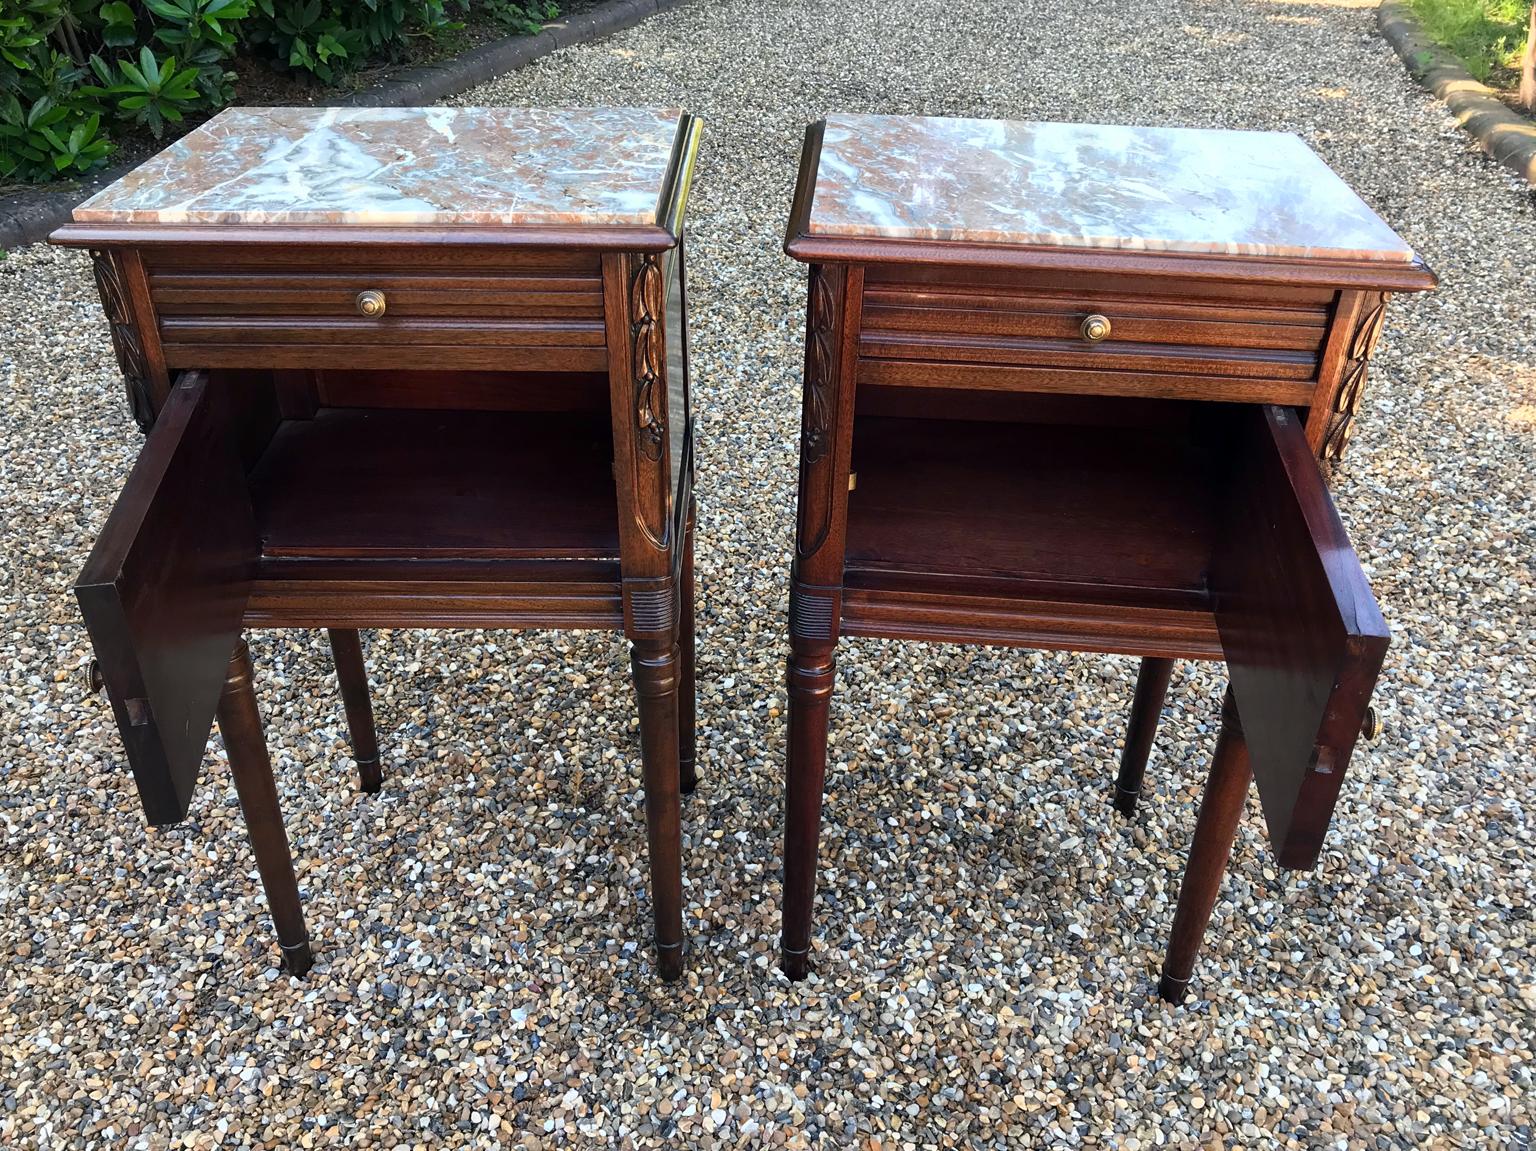 Pair of Edwardian French Mahogany Bedside Tables In Good Condition In Richmond, London, Surrey